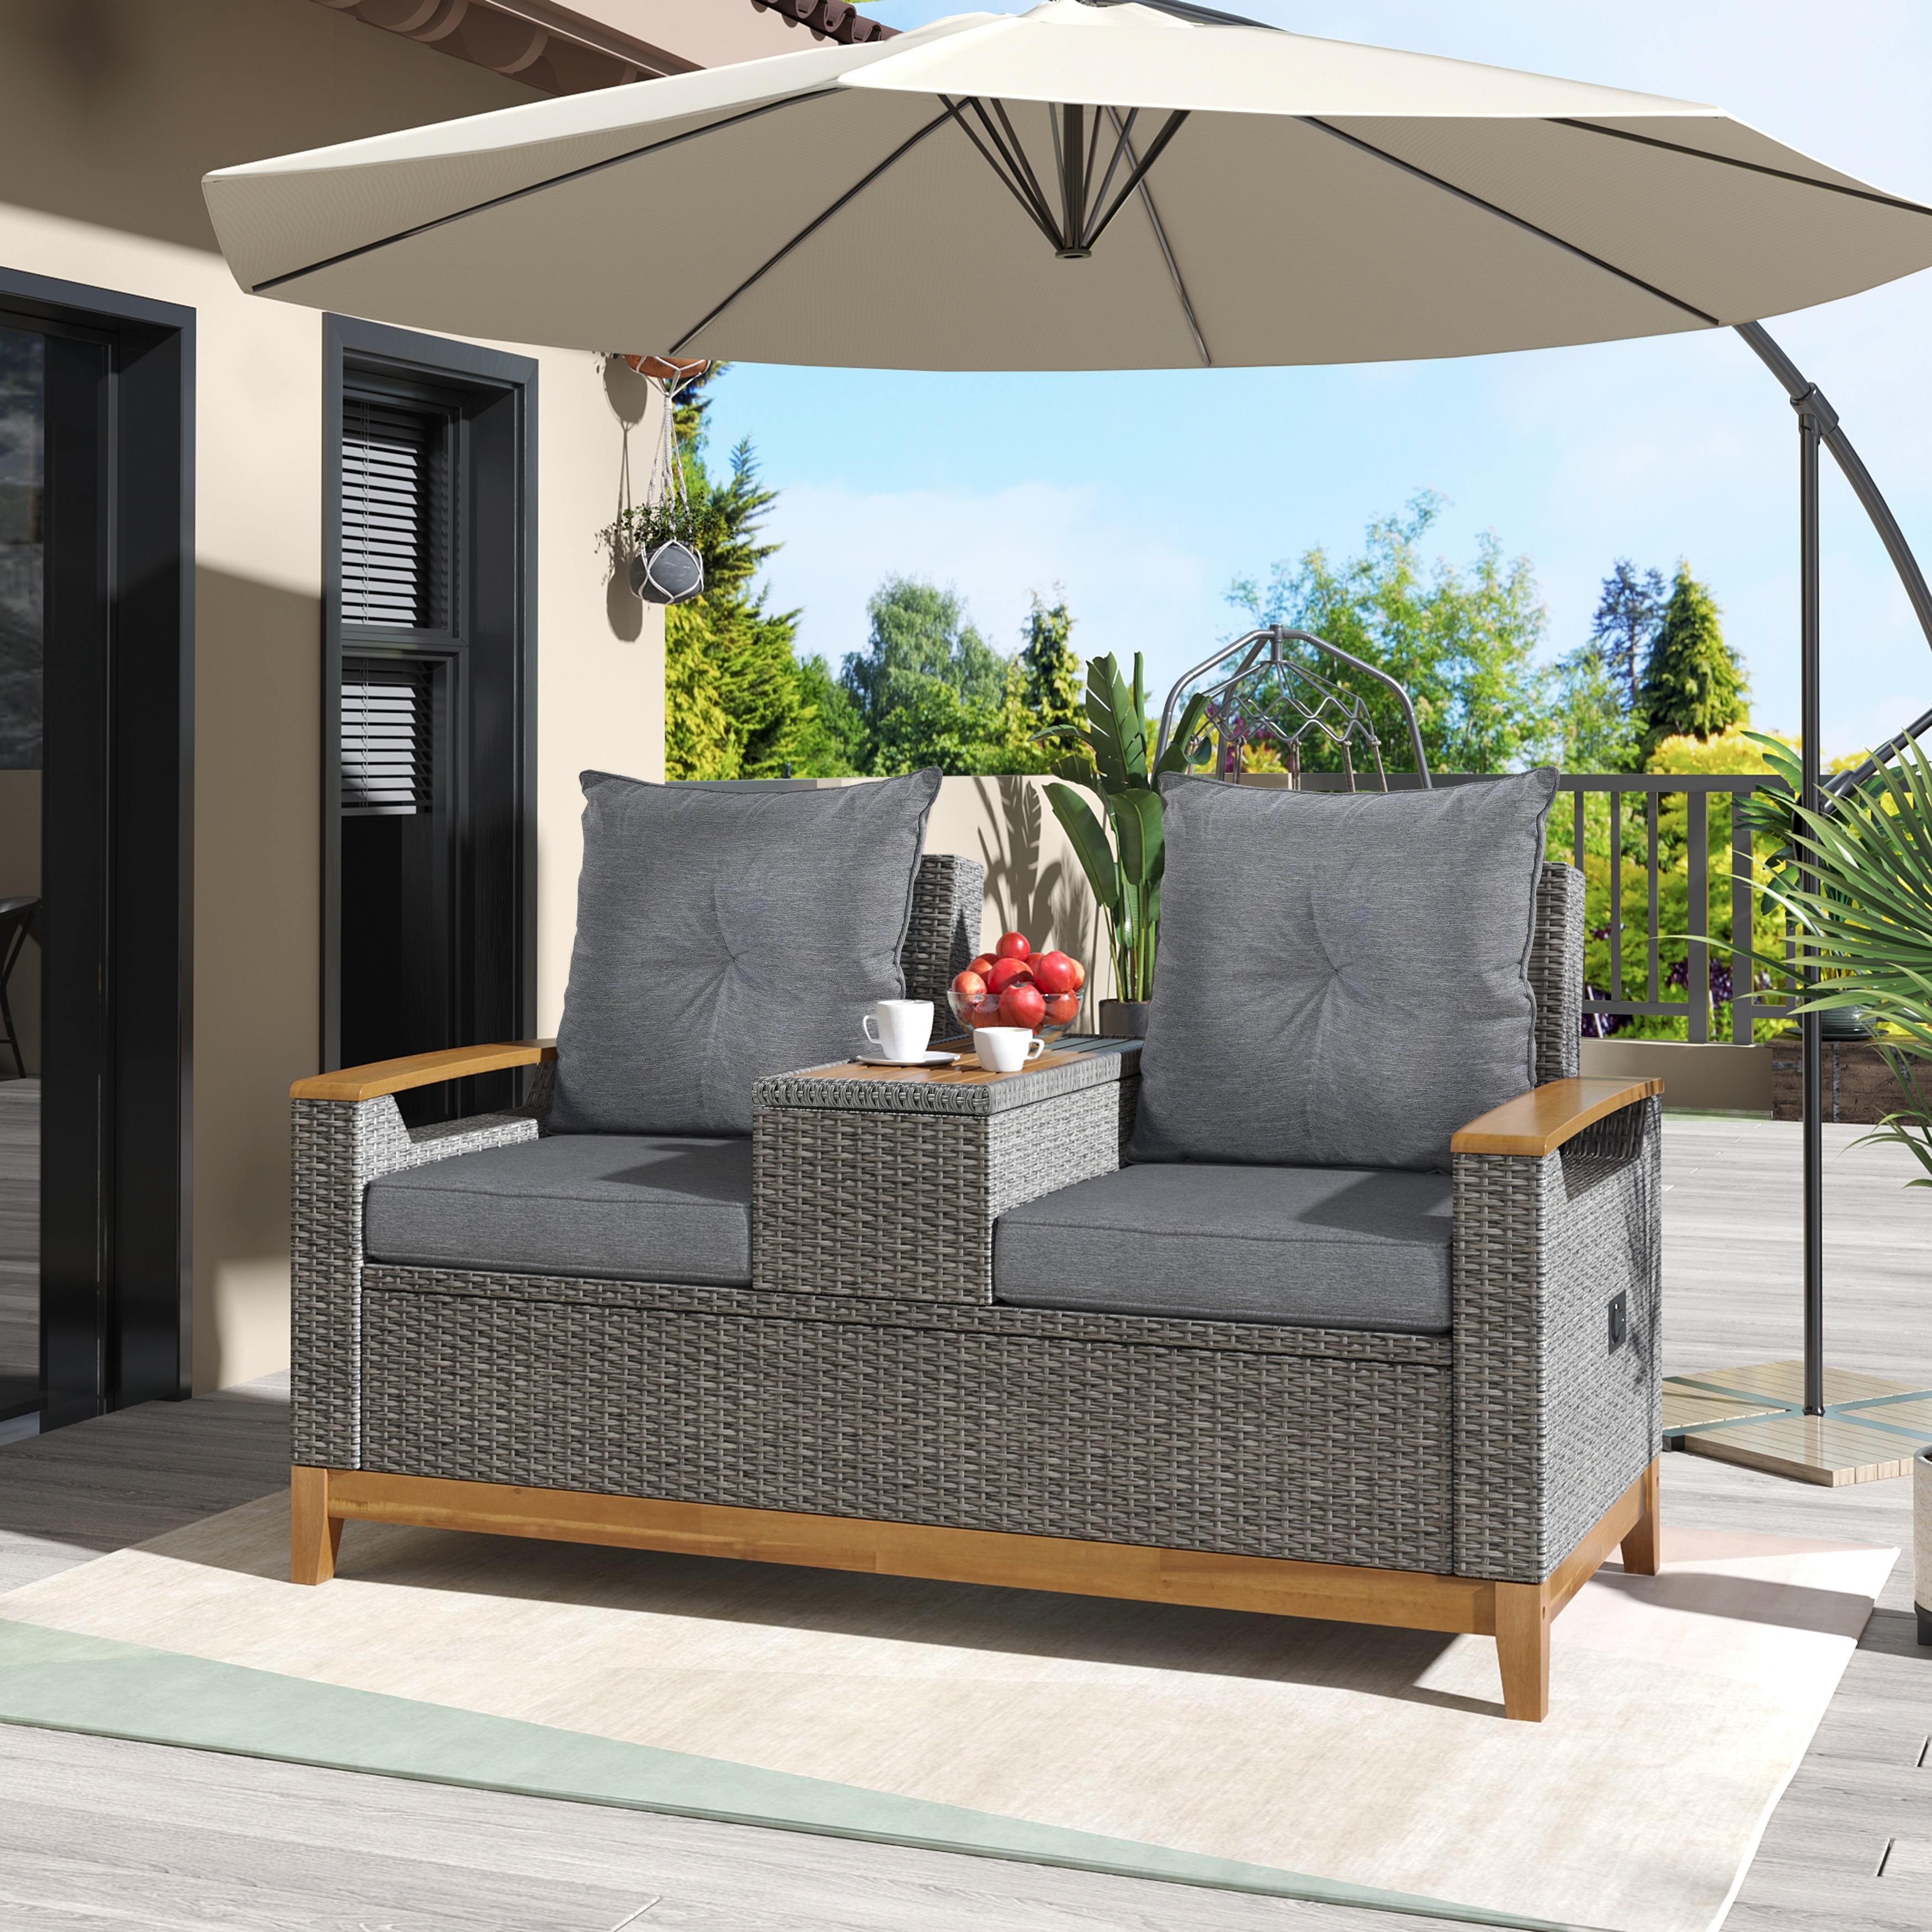 Outdoor Comfort Adjustable Loveseat  Armrest With Storage Space  Suitable For Courtyards/ Swimming Pools And Balconies